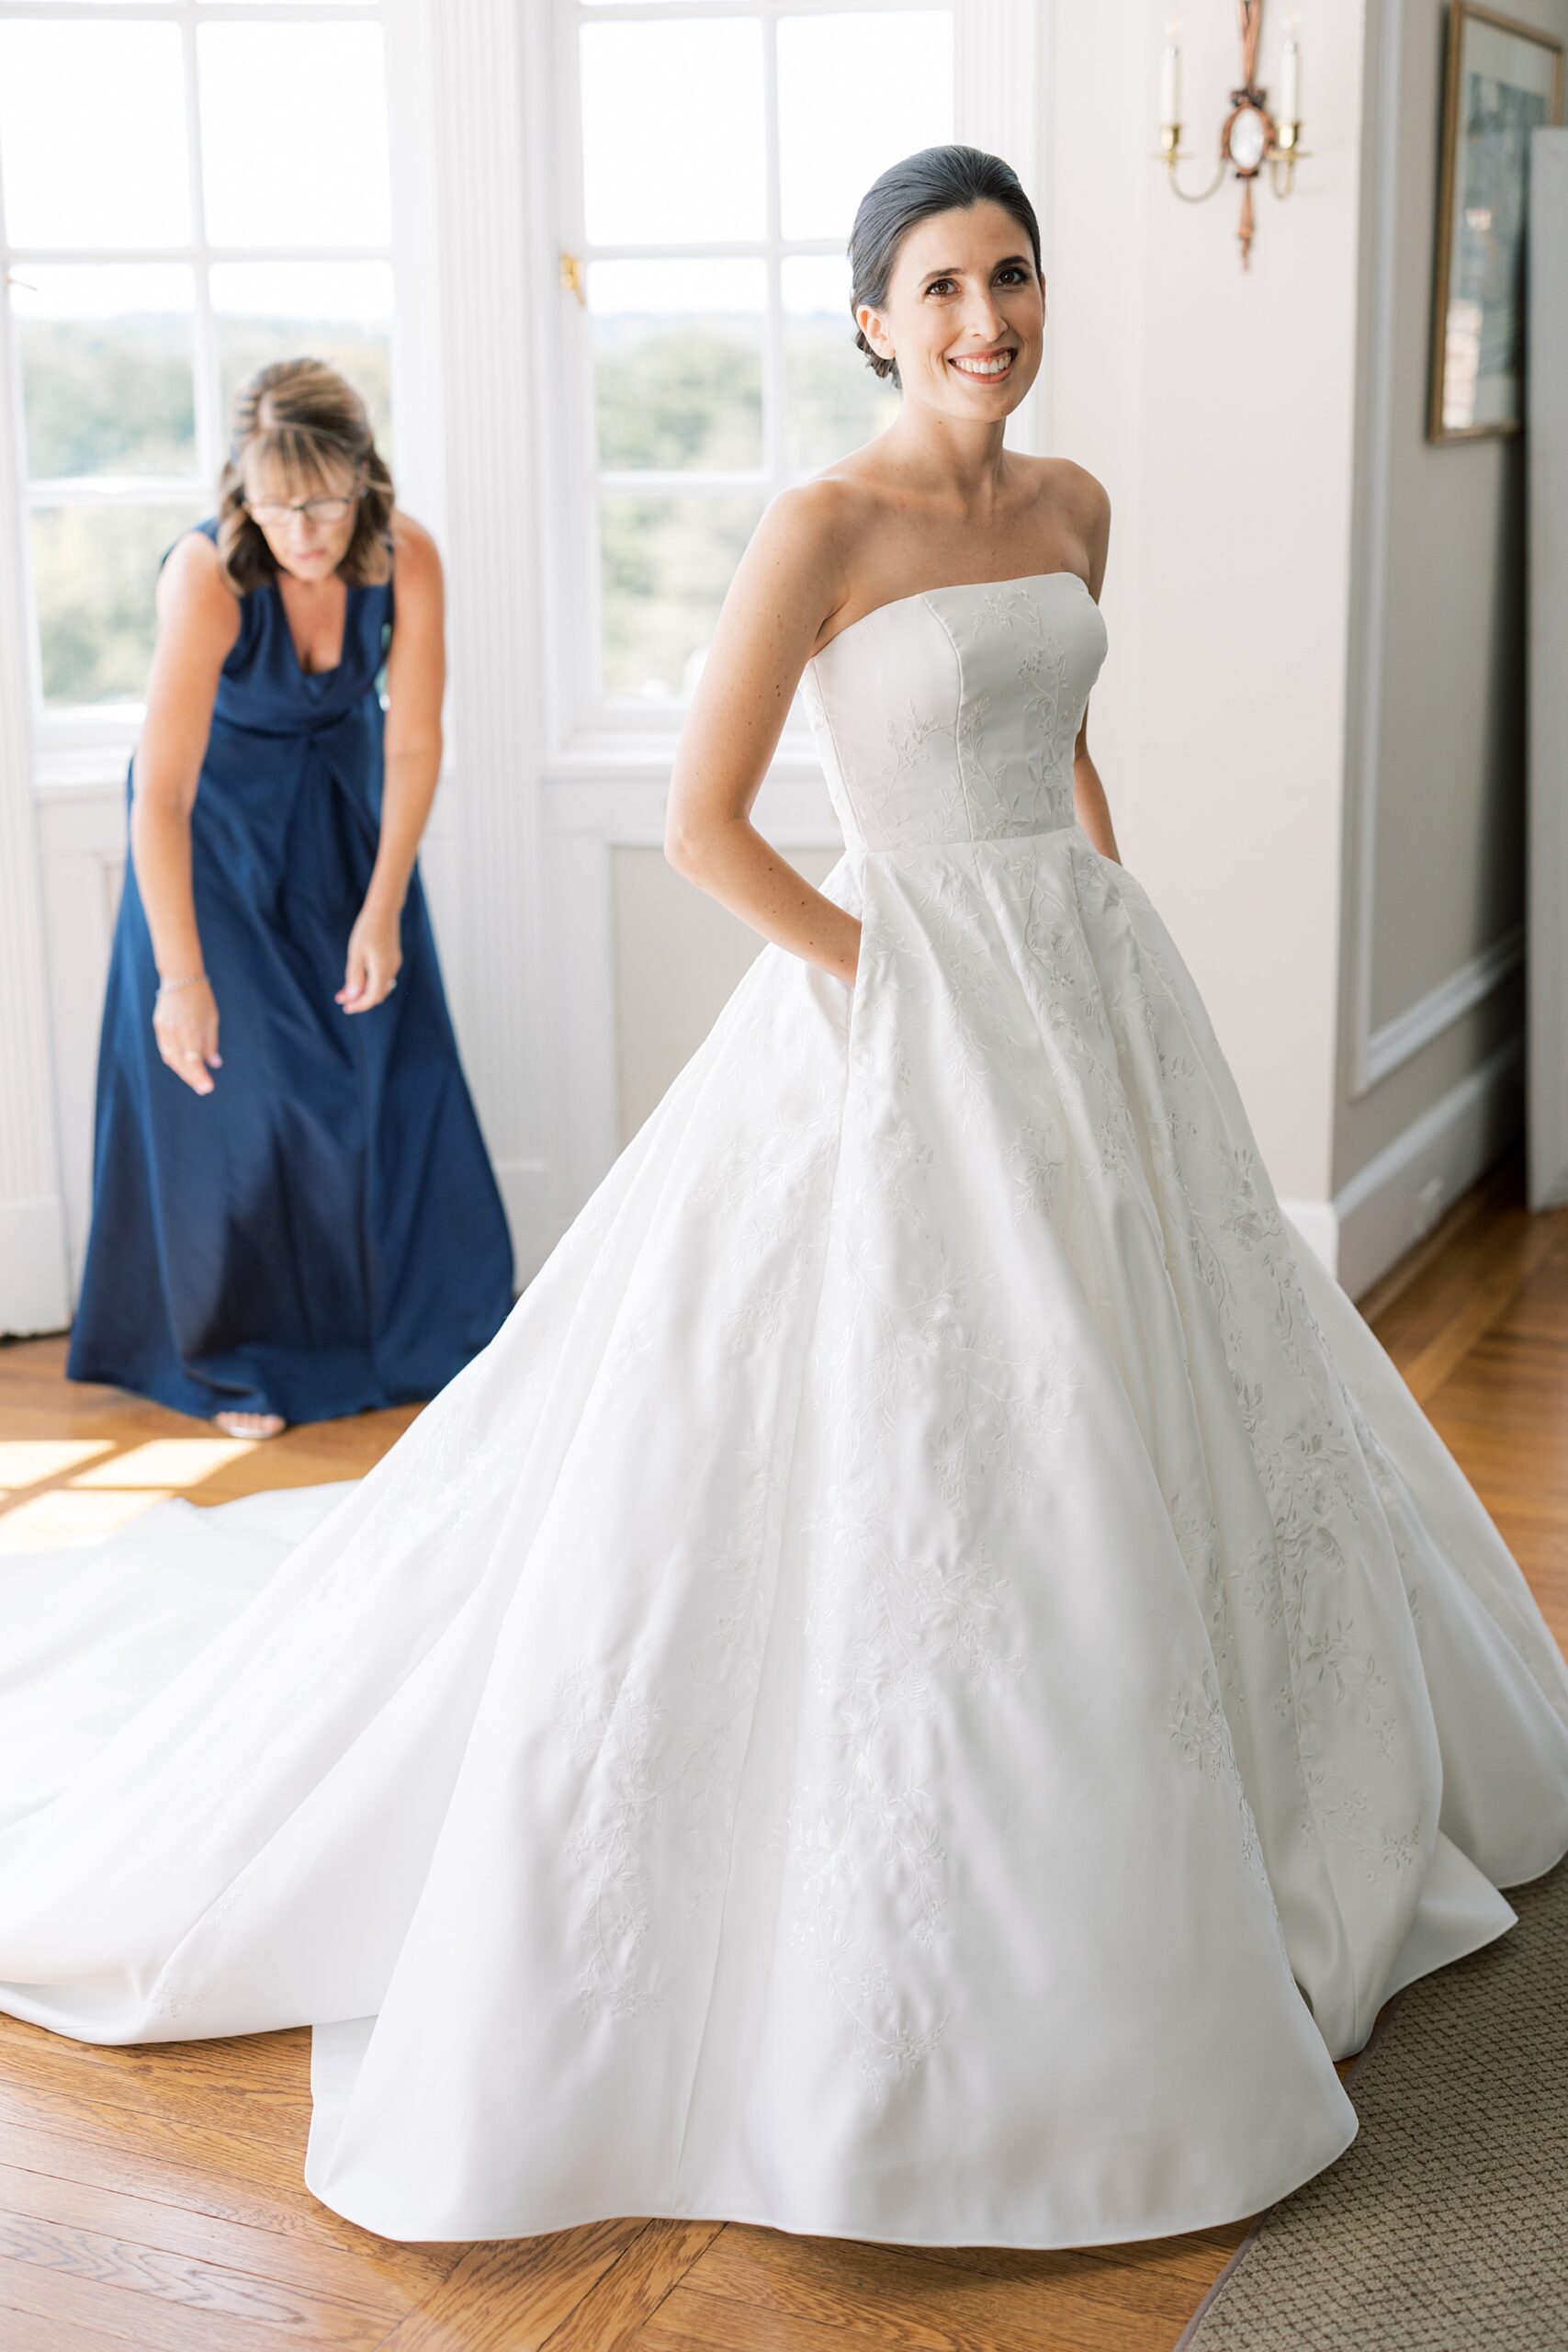 bridesmaid in navy gown helps bride into strapless wedding dress